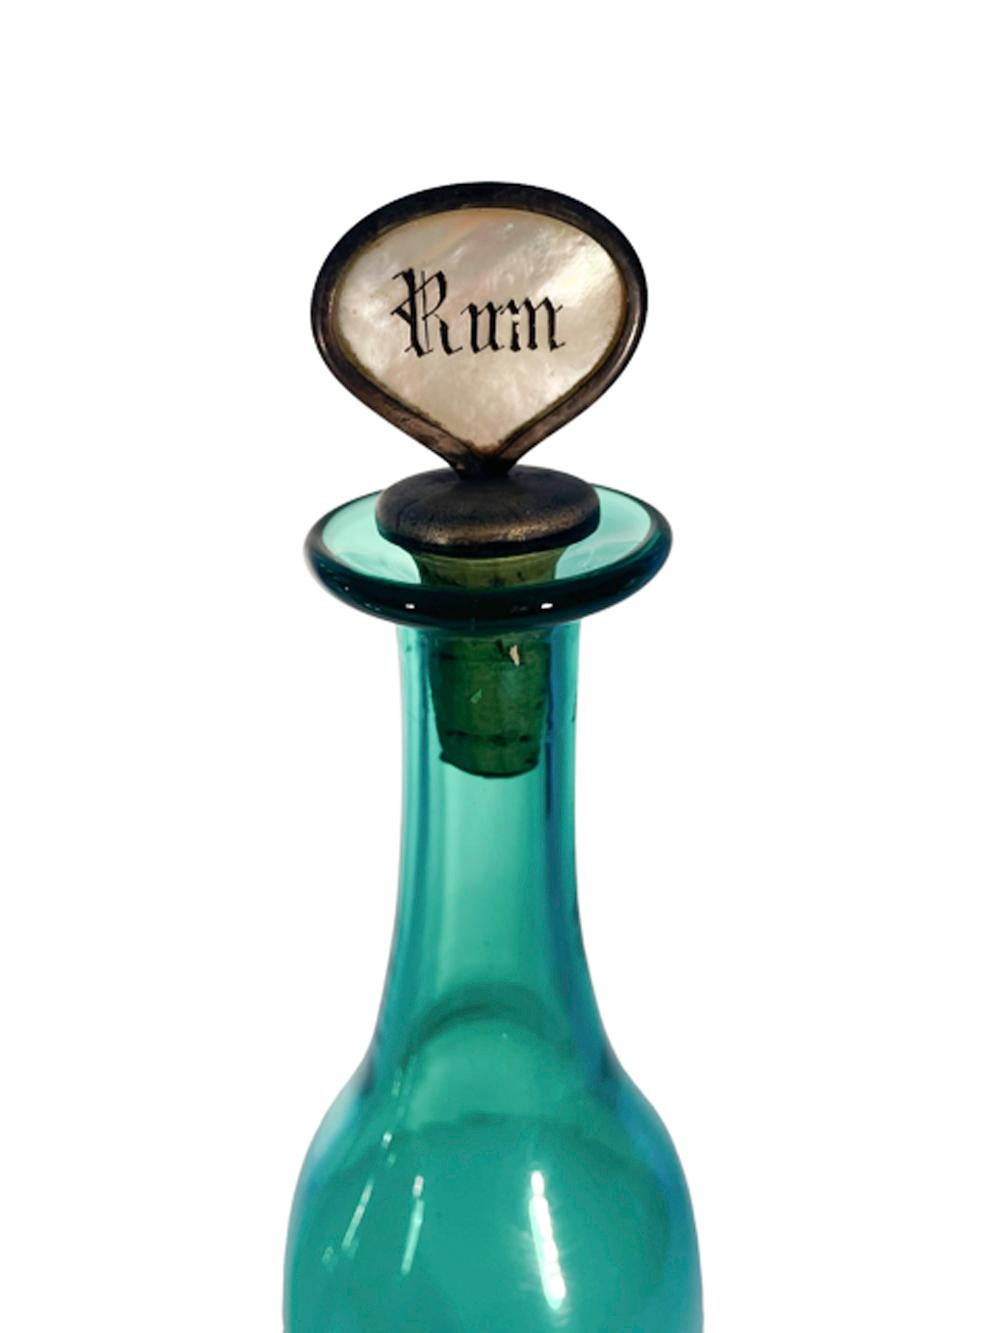 Tall thin pair of Mid-19th Century table bottles or decanters in Bristol green with metal mounted cork stoppers having integral shell labels etched 'Rum' and 'Port'.